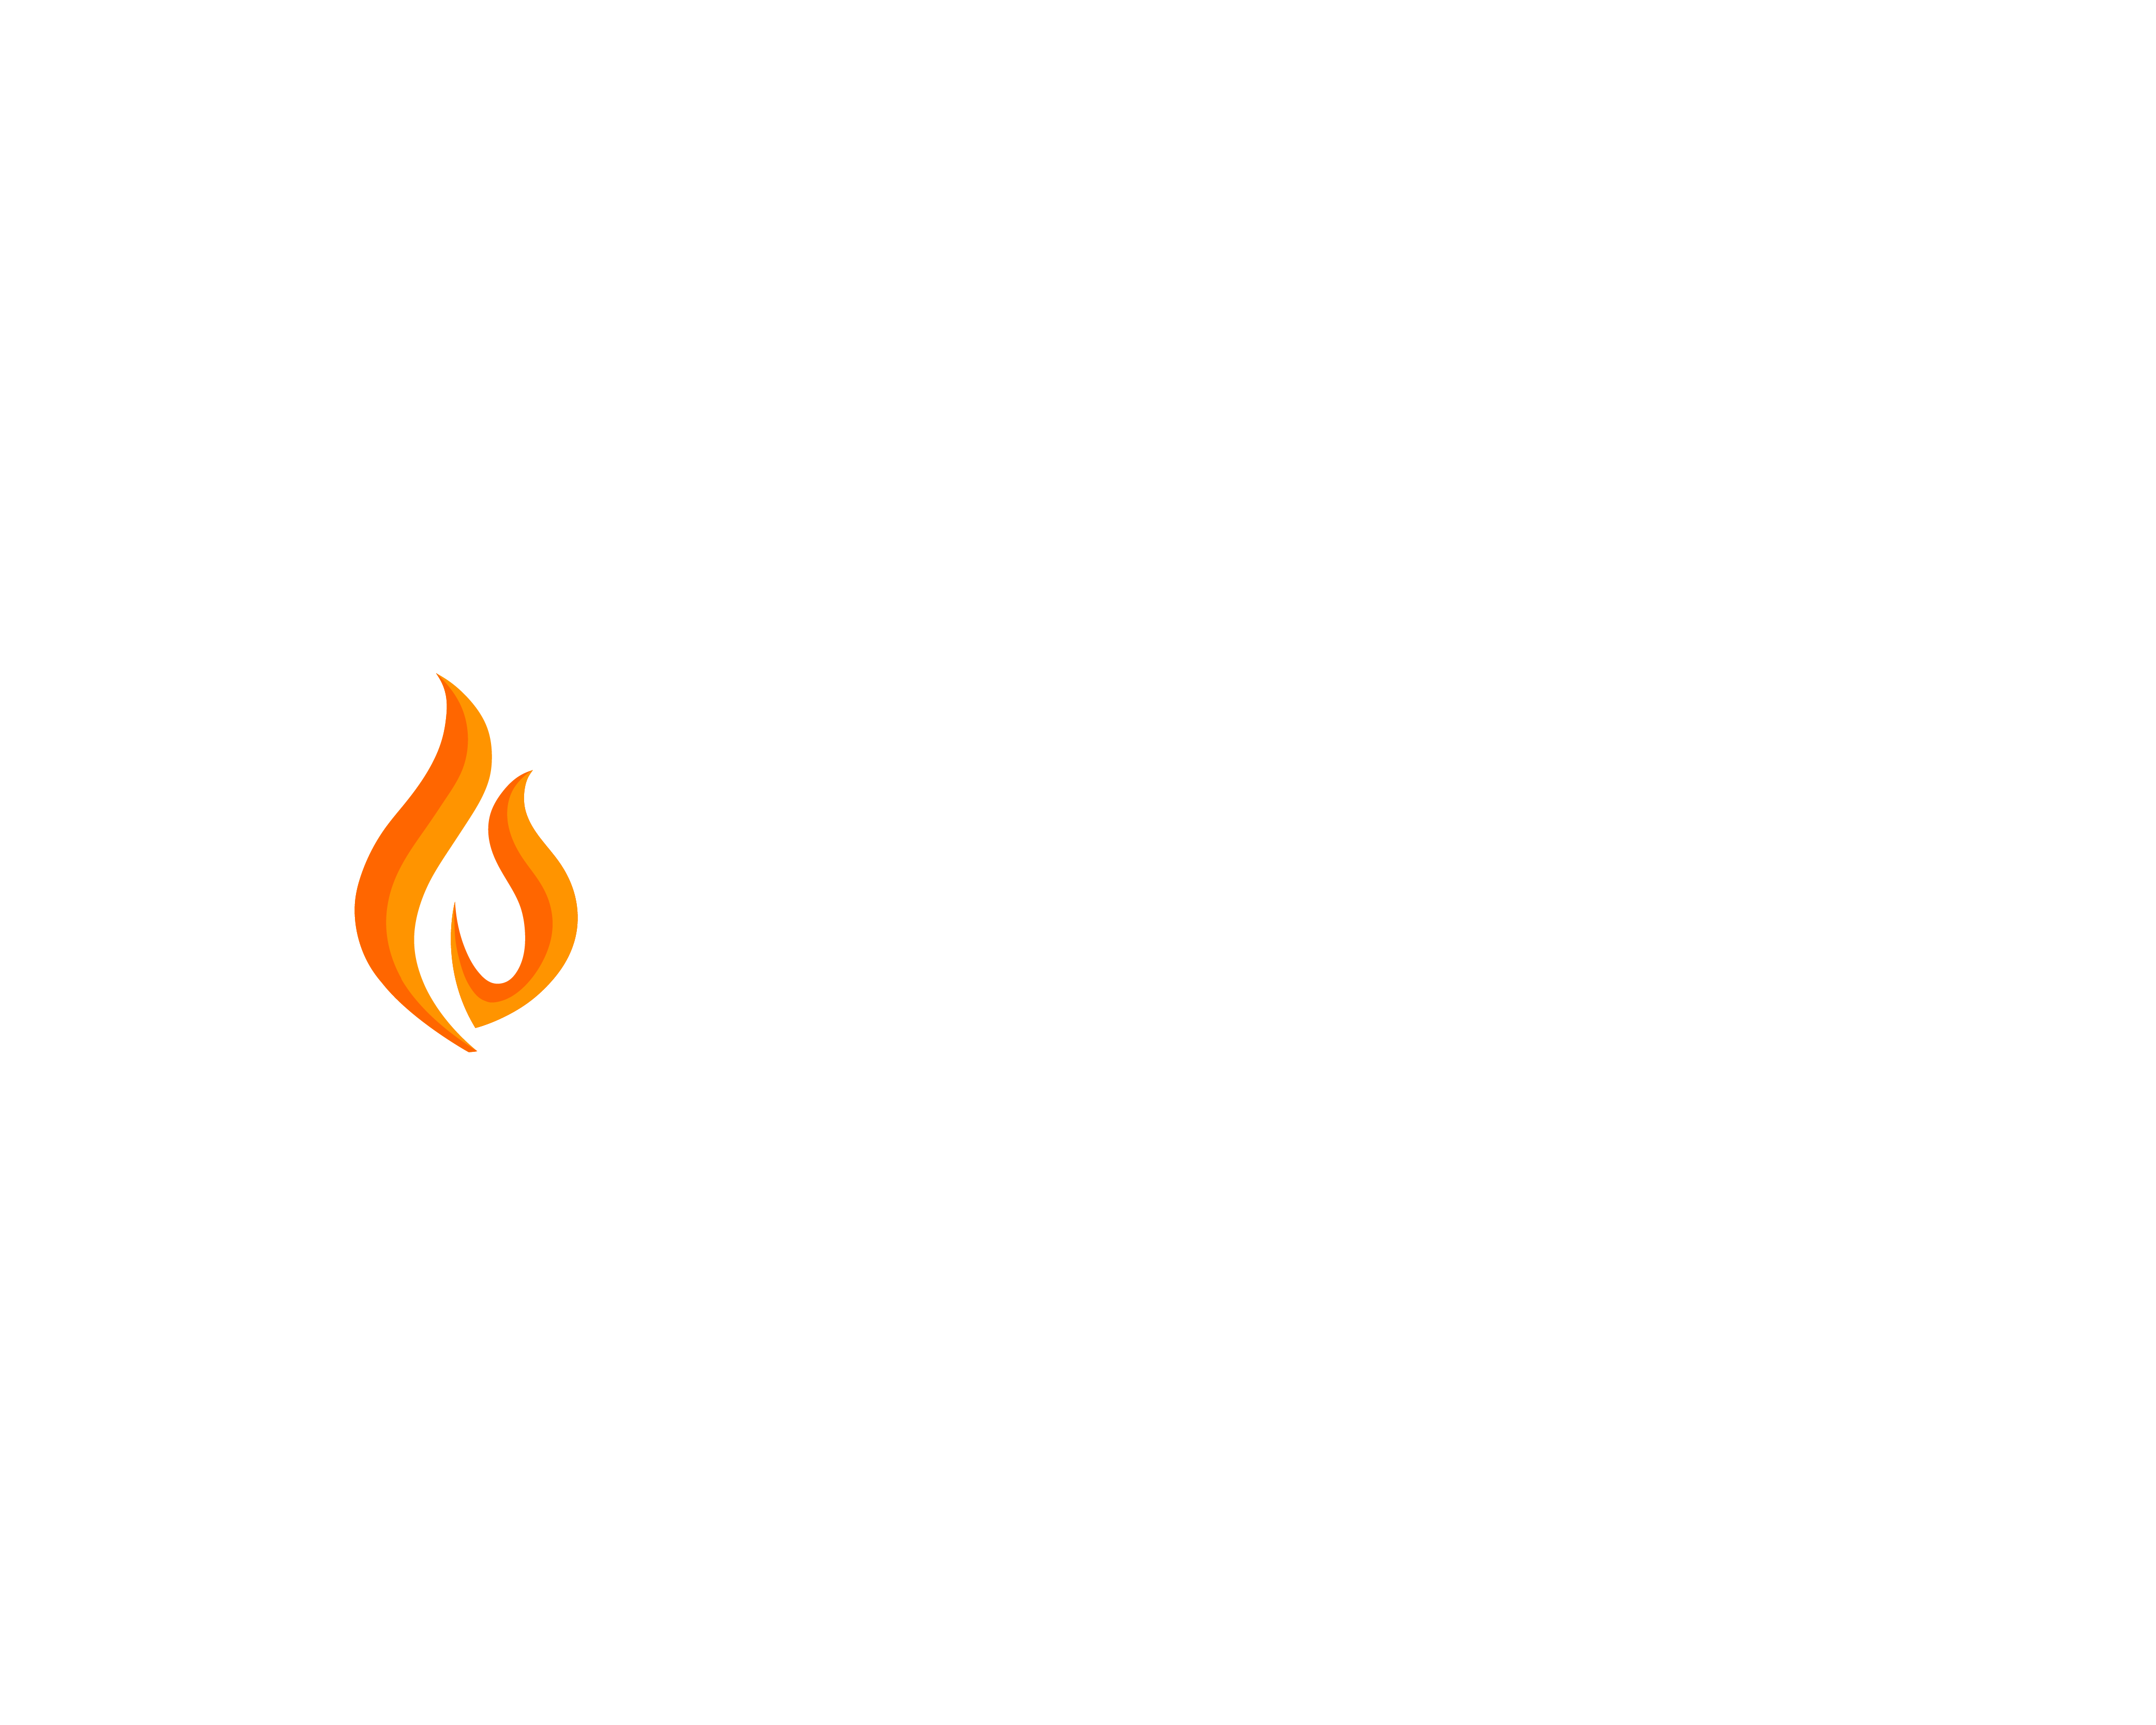 The Atmosfire